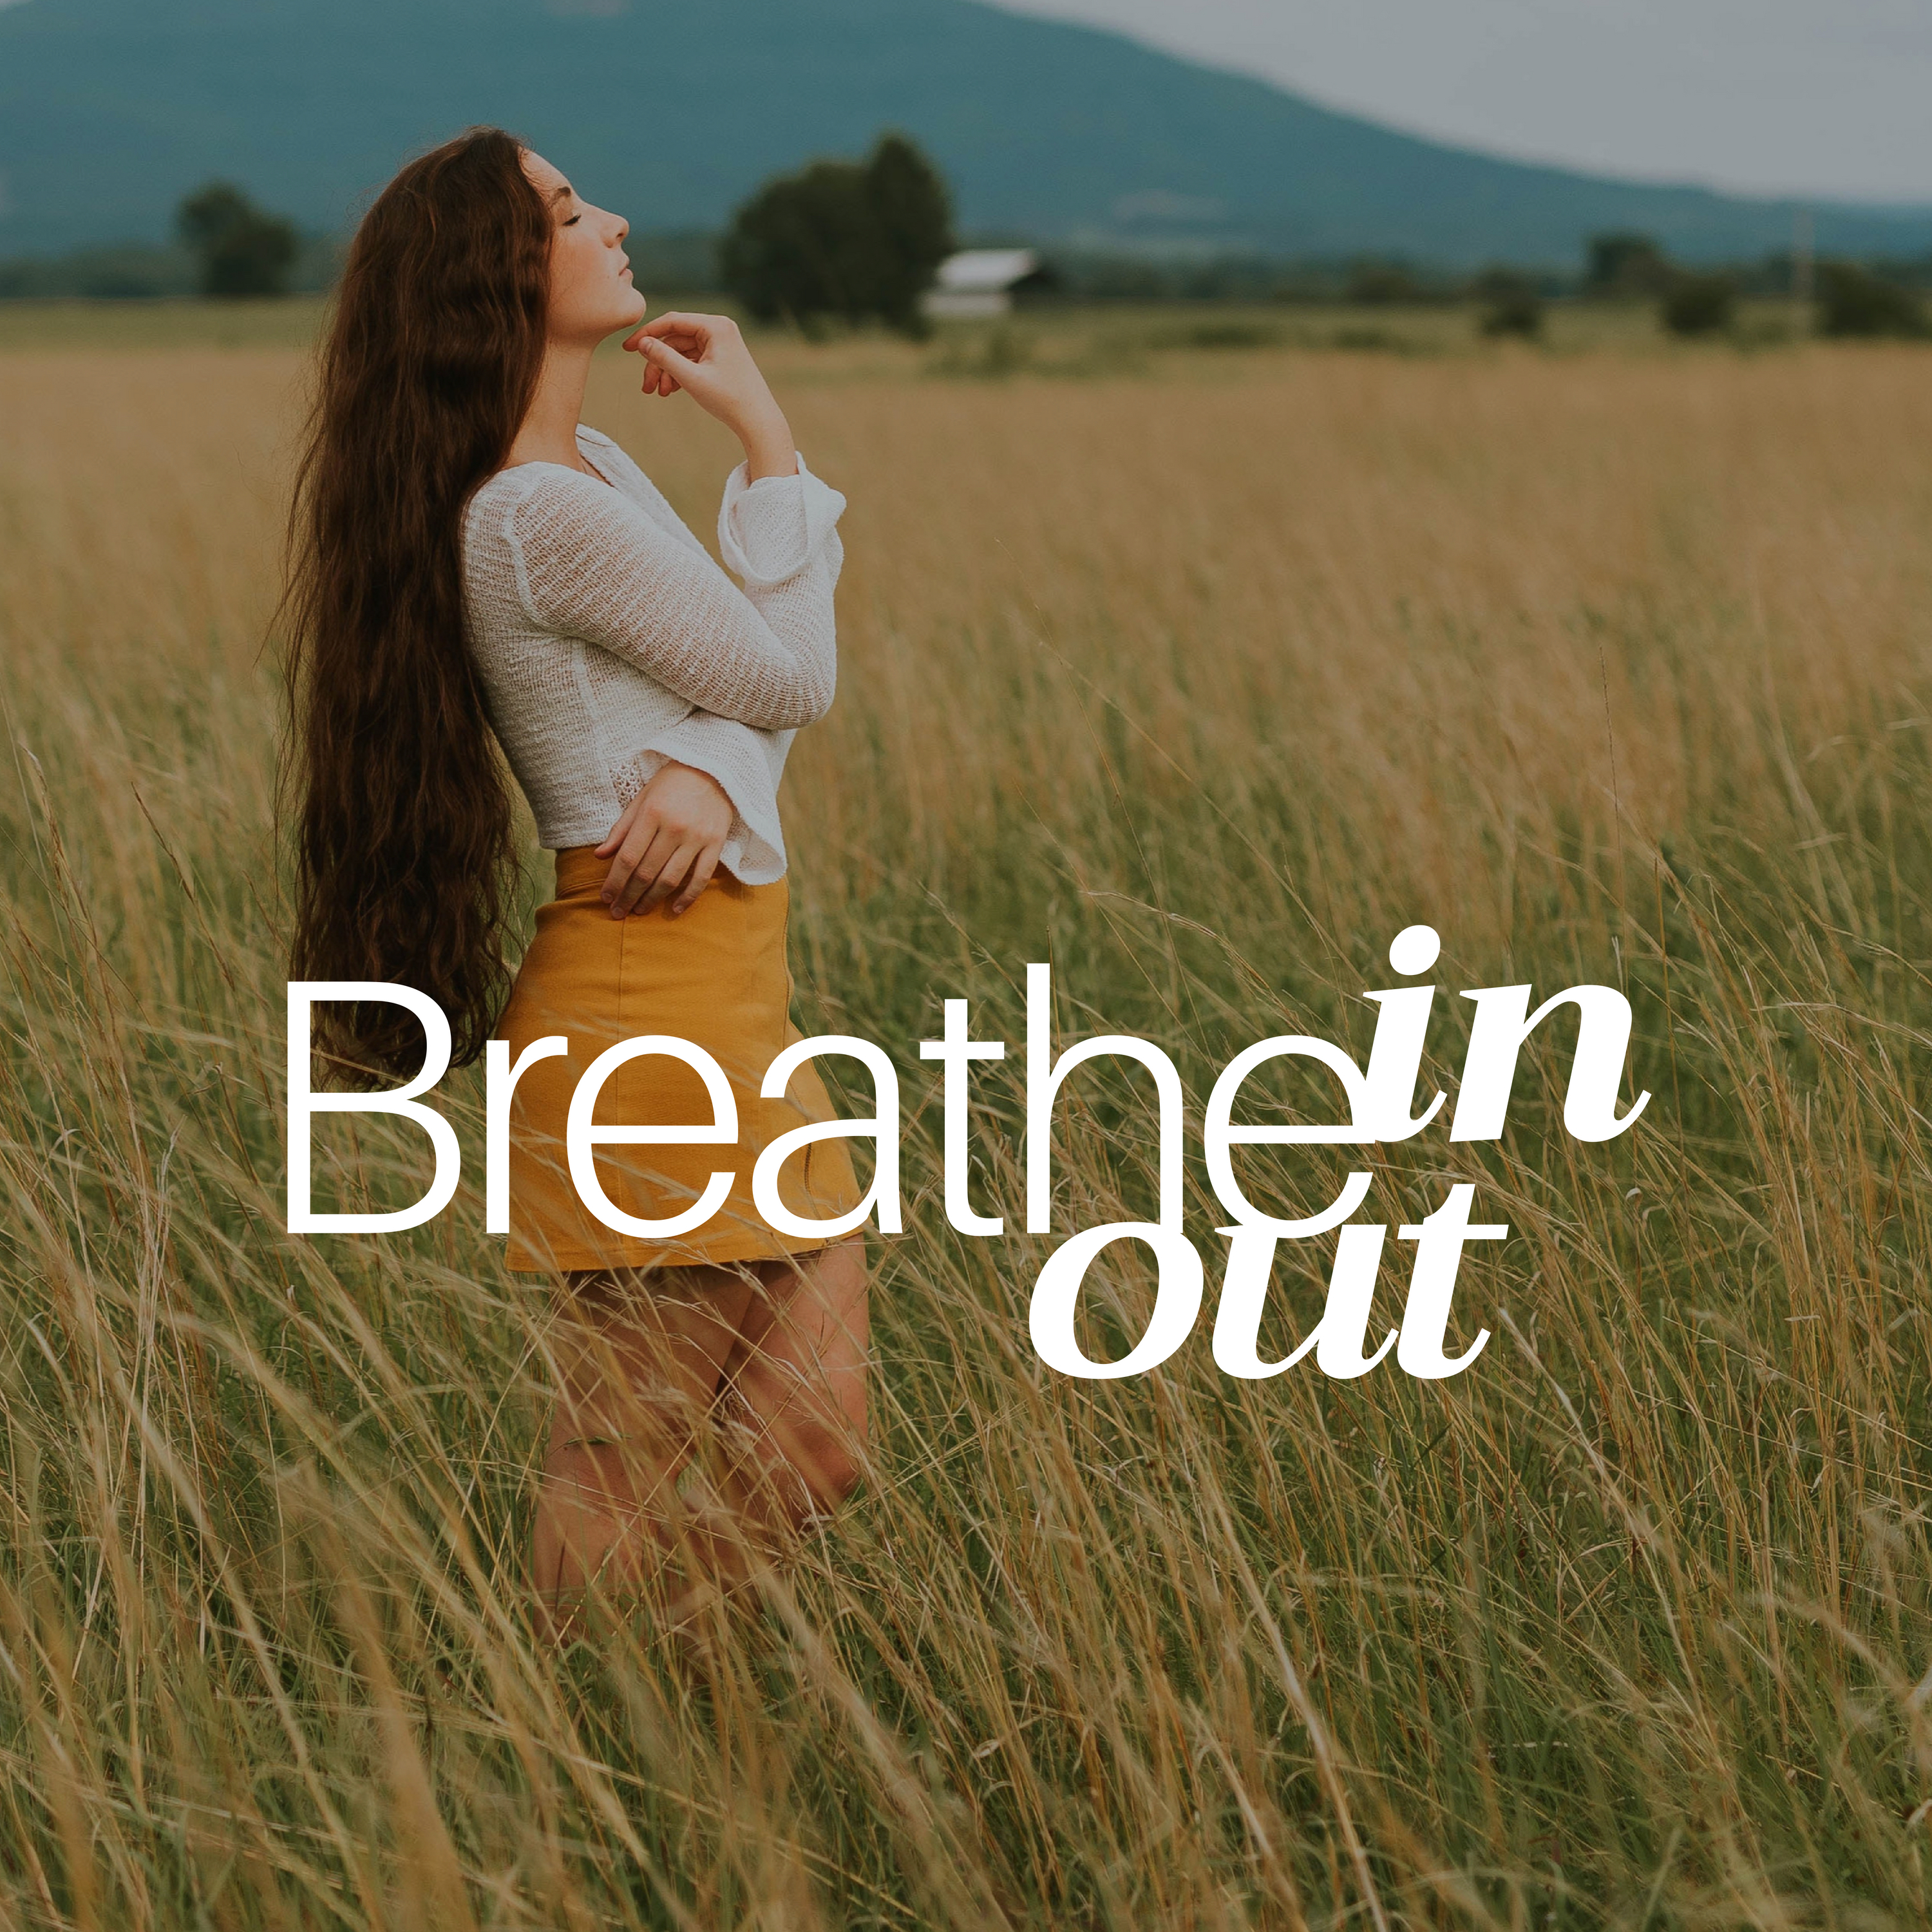 Breathe in, Breathe out